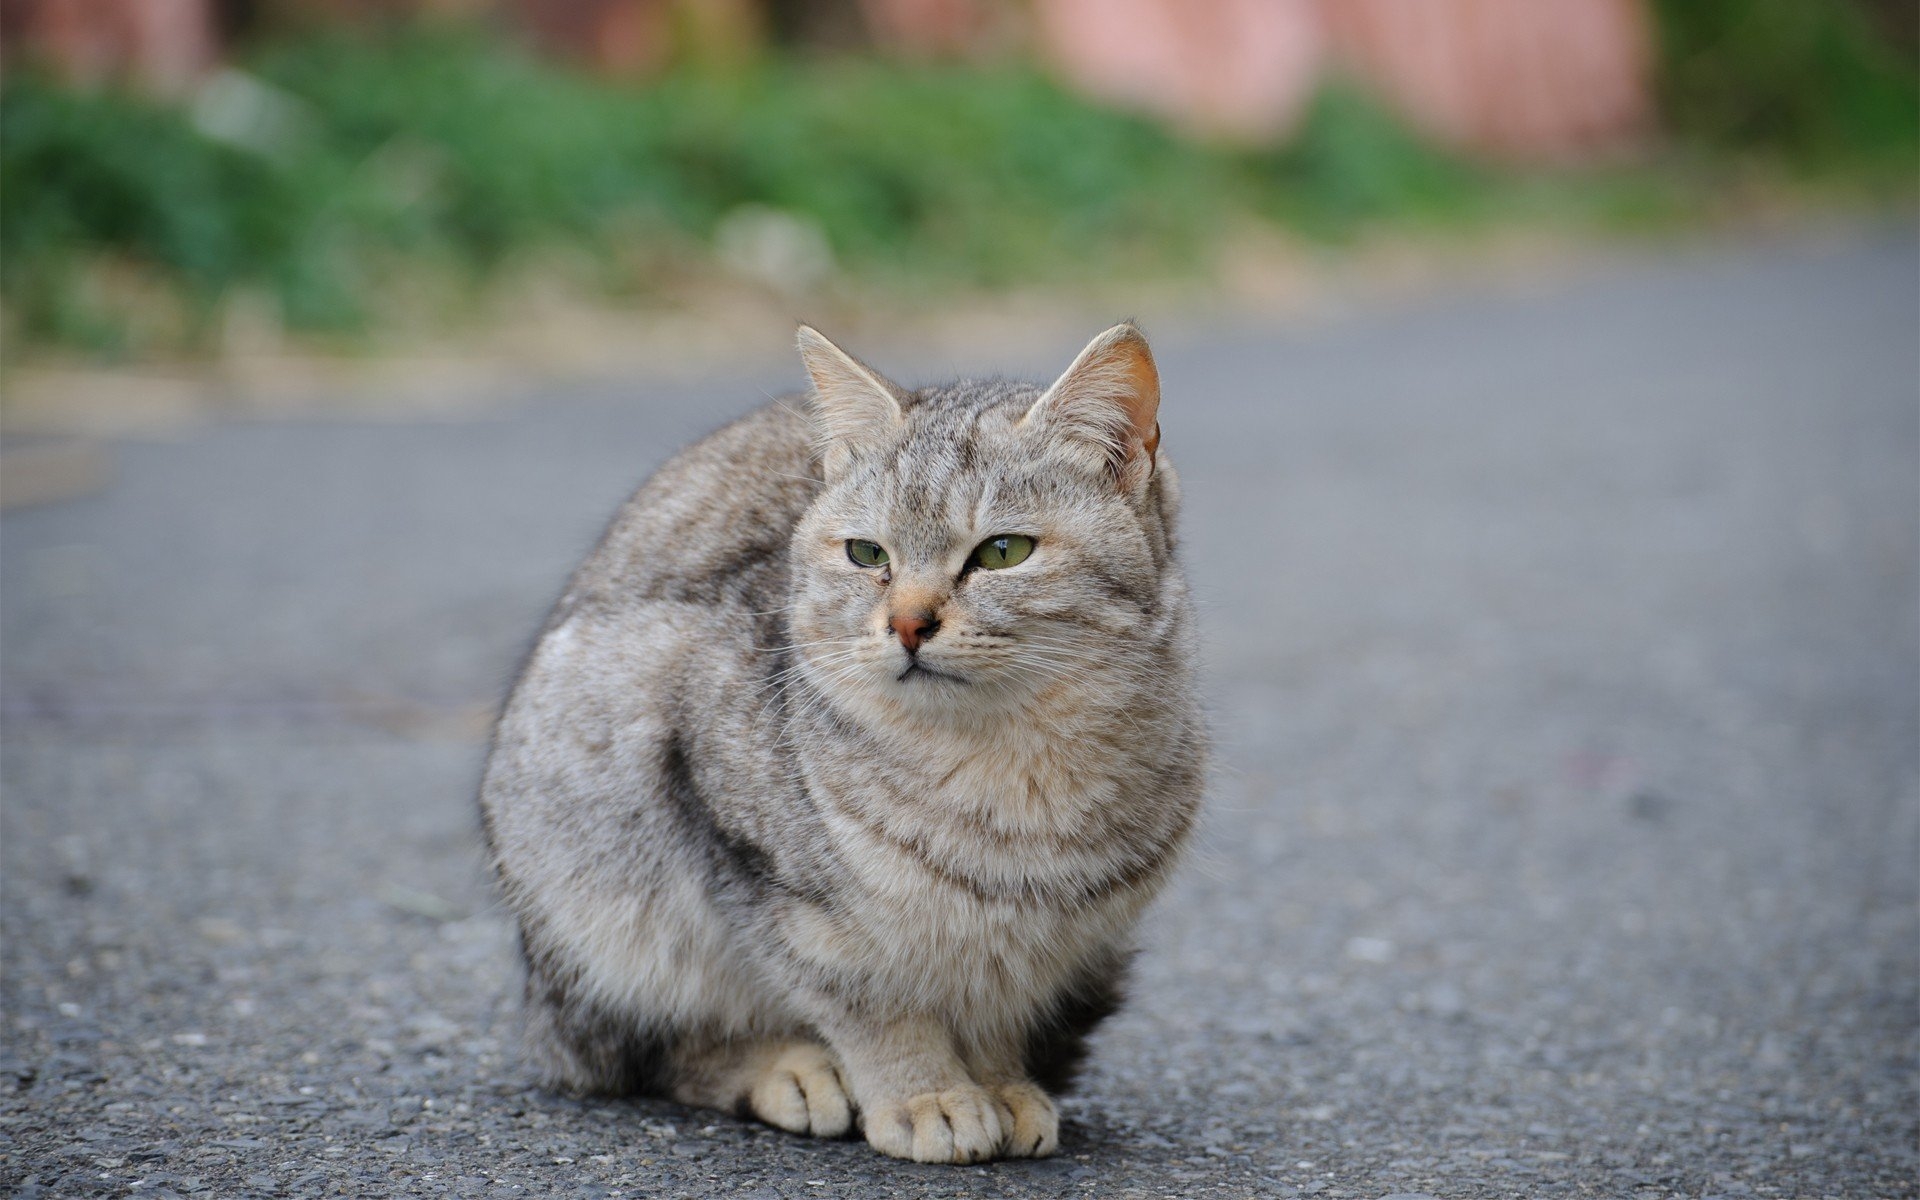 A stray cat sitting in the road.